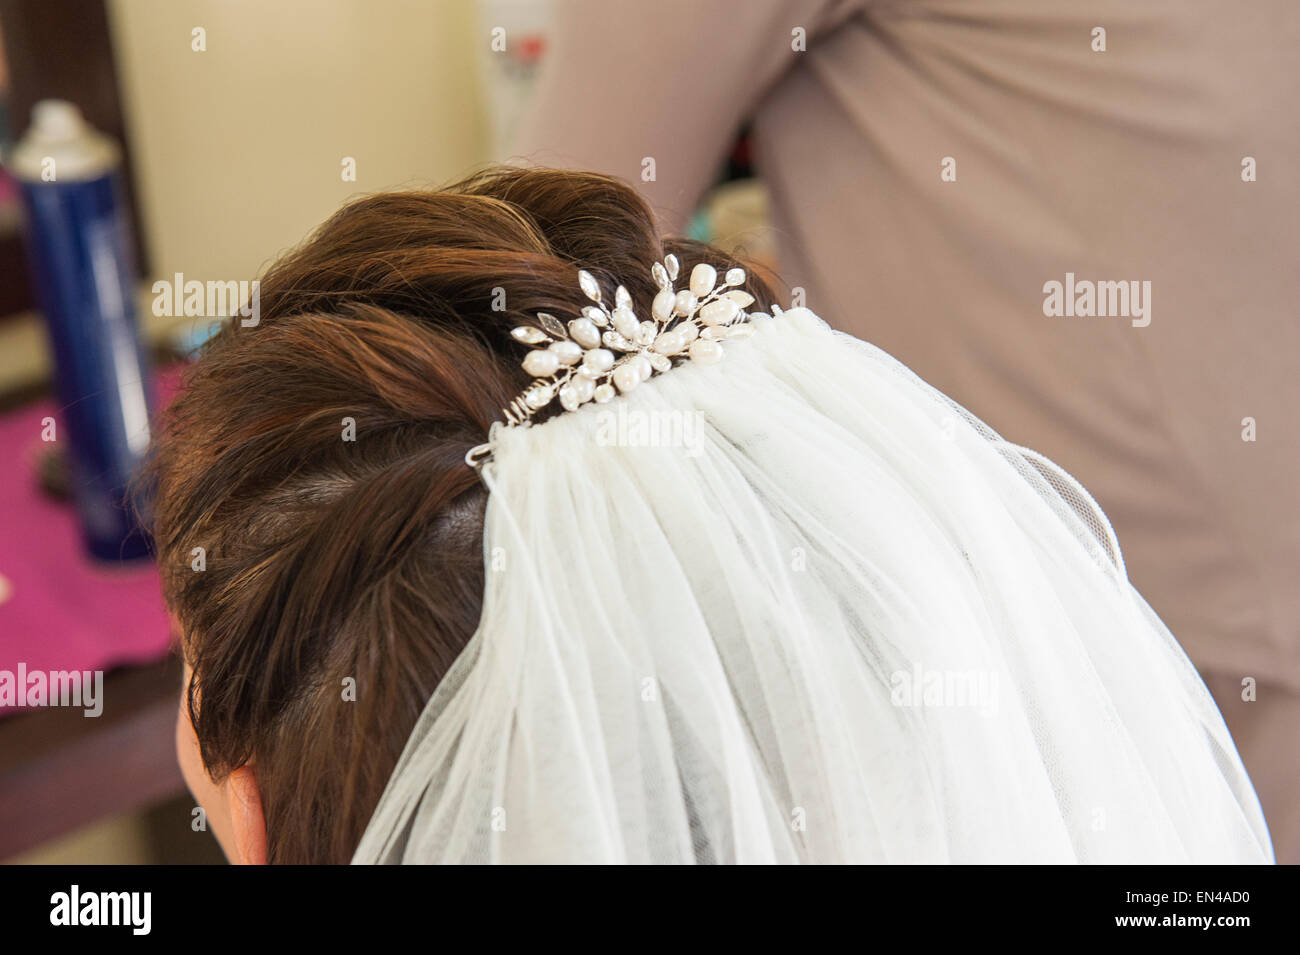 Closeup detail of a brides head showing hair style and head piece veil Stock Photo